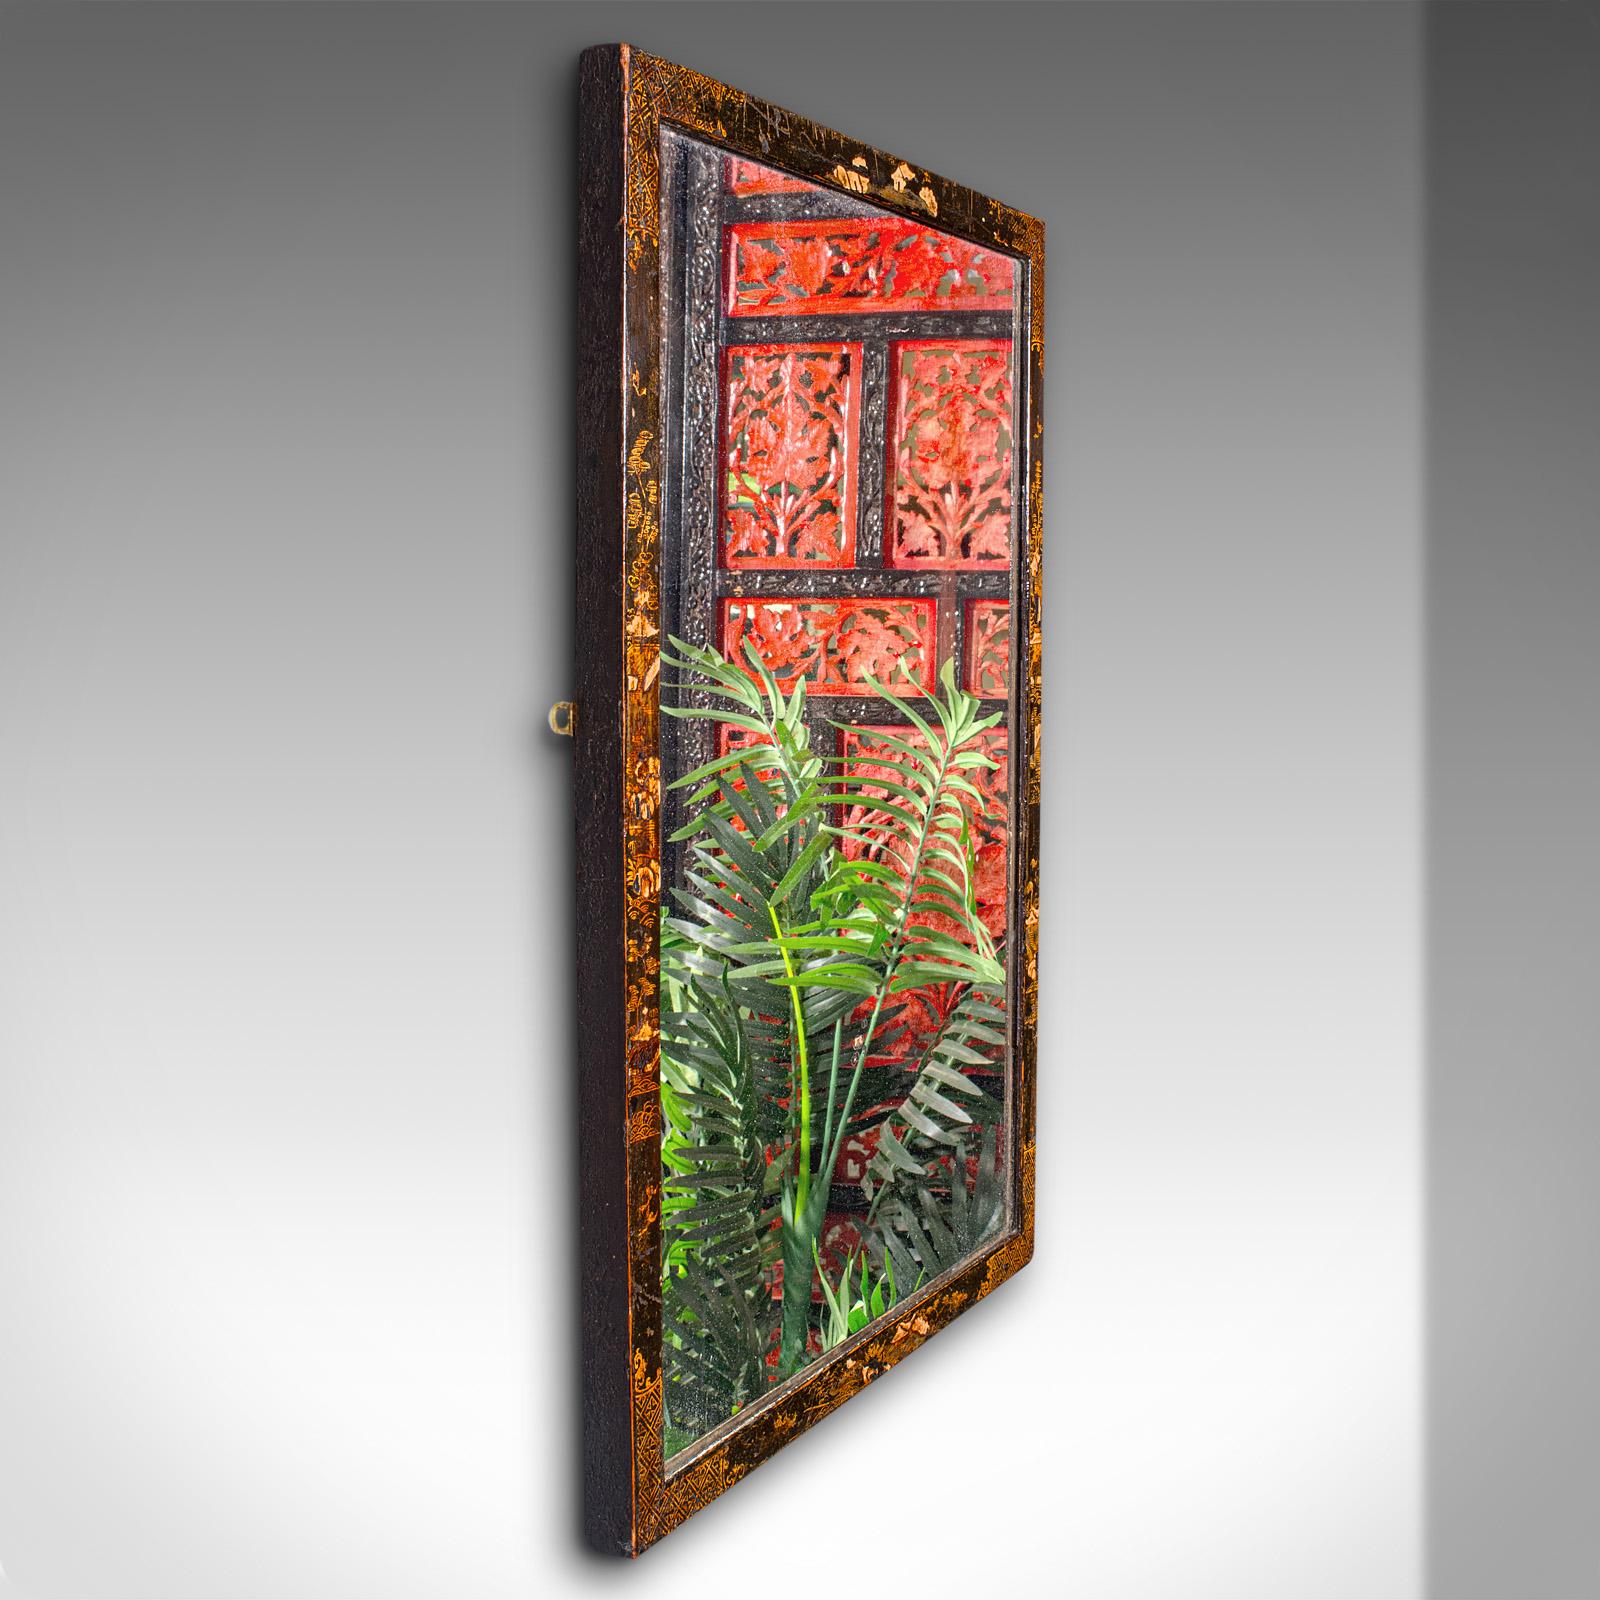 Chinese Antique Chinoiserie Wall Mirror, Oriental, Japanned, Hallway, Bedroom, Victorian